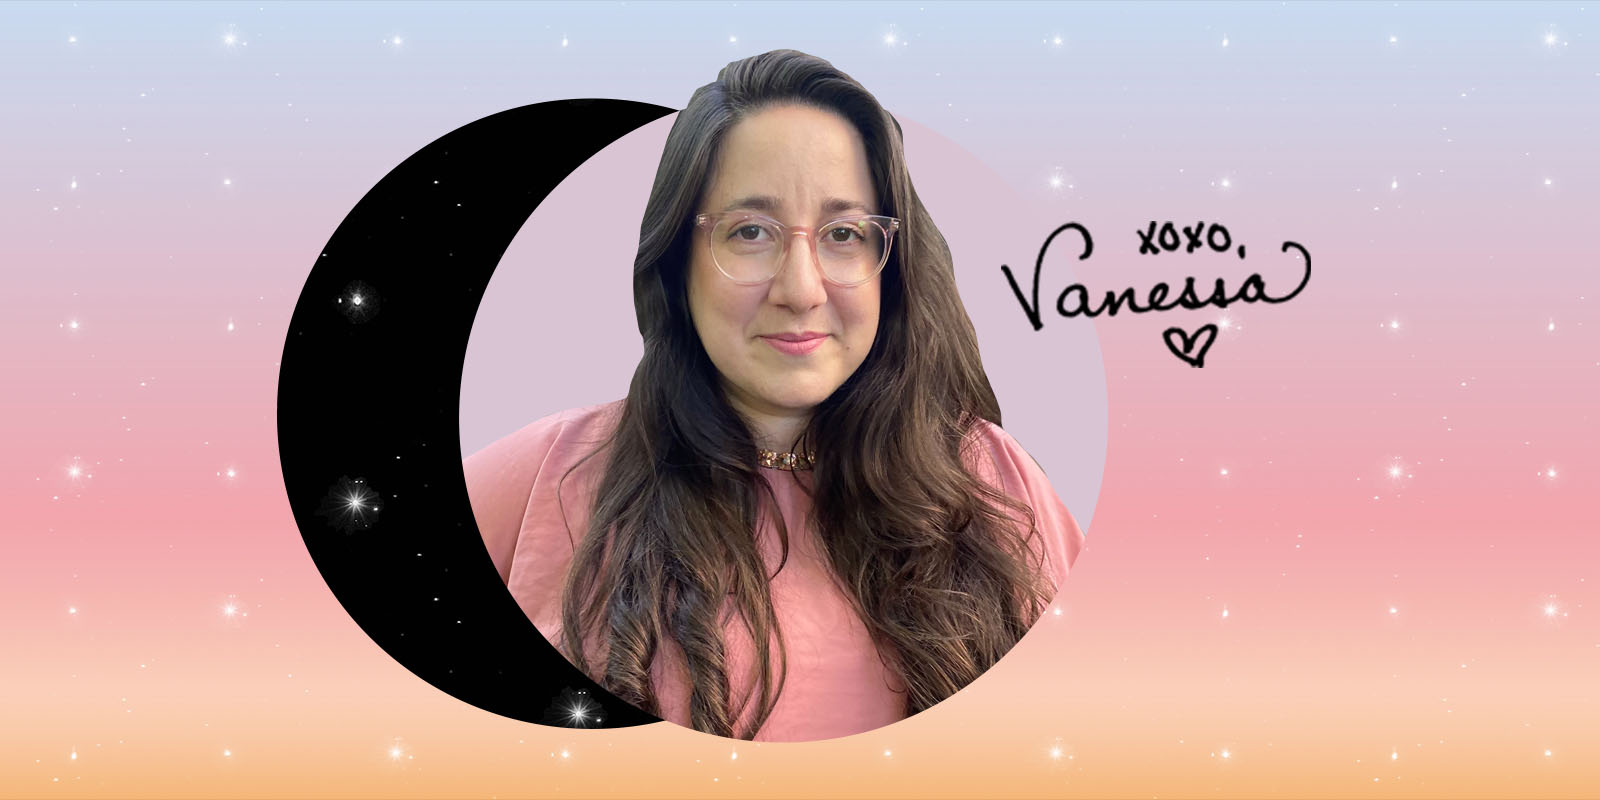 A headshot of Vanessa against a starry circle against a sunrise background gradient. Vanessa is a white woman with clear glasses and long straight brown hair. She is smiling.